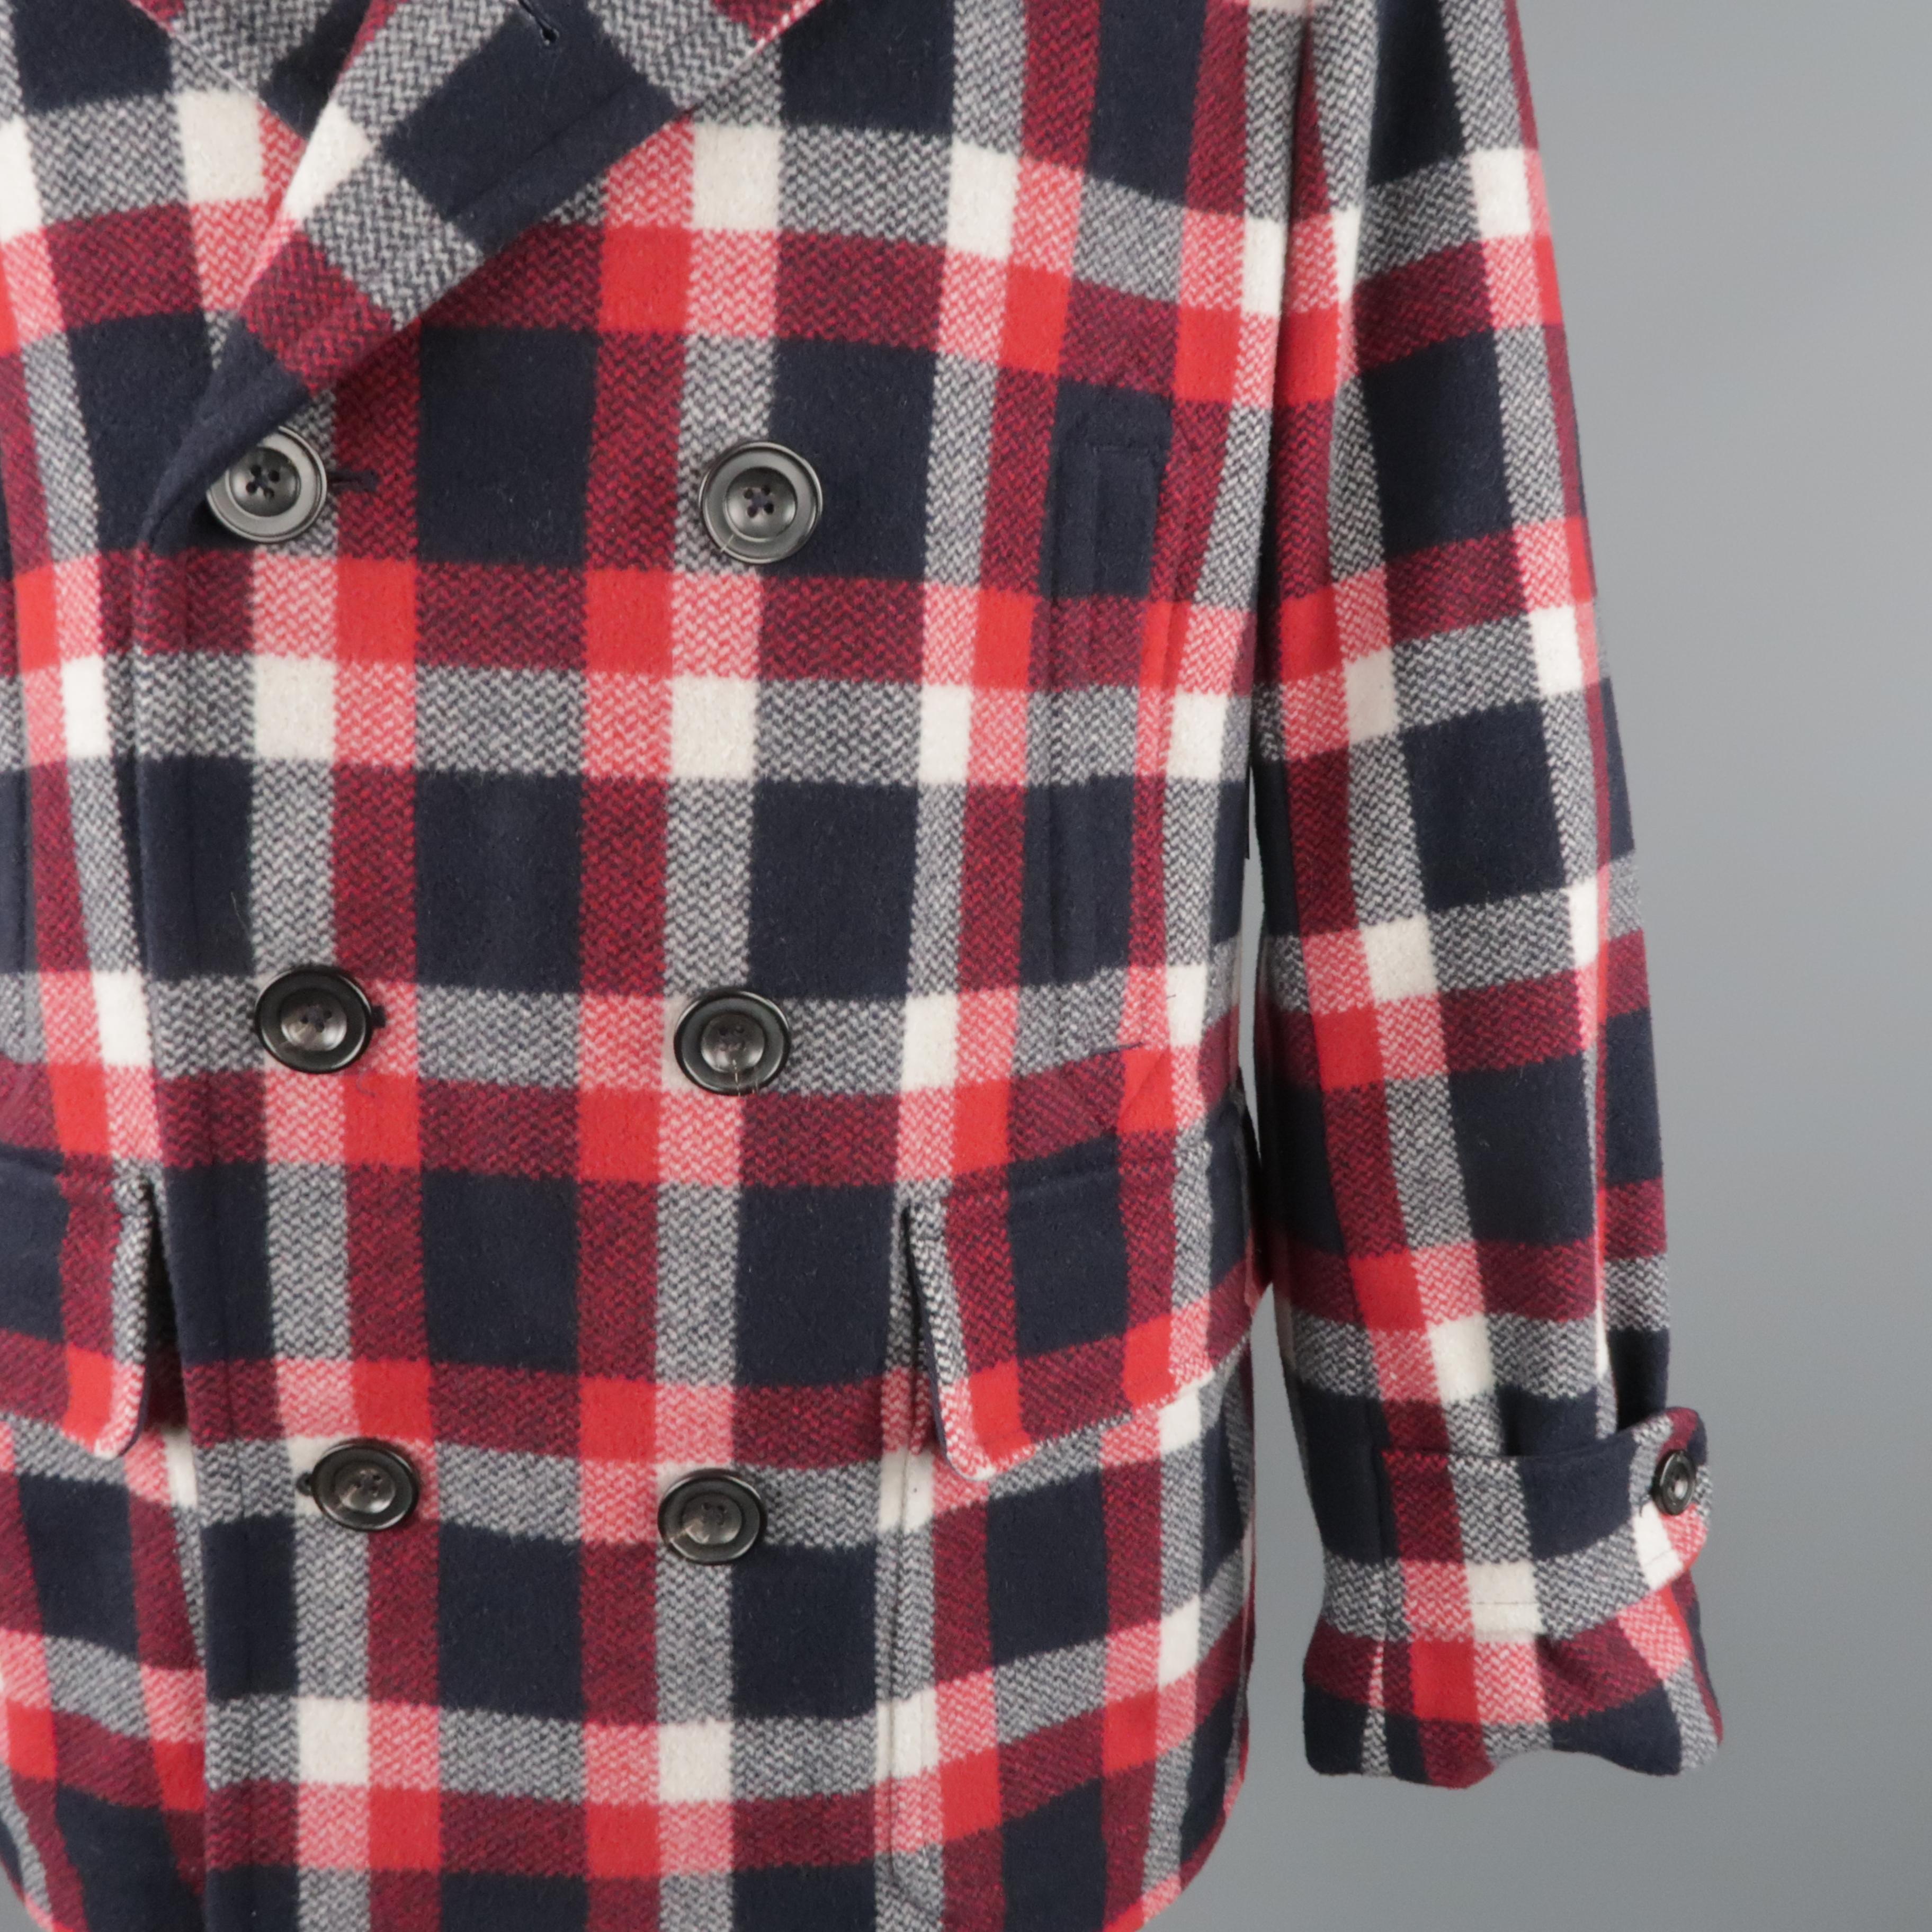 OLO by RALPH LAUREN peacoat comes in red multi-color plaid wool featuring a notch lapel, slit & patch pockets, and a double breasted closure.
 
Excellent Pre-Owned Condition.
Marked: XL
 
Measurements:
 
Shoulder: 21.5 in.
Chest: 48 in.
Length: 29